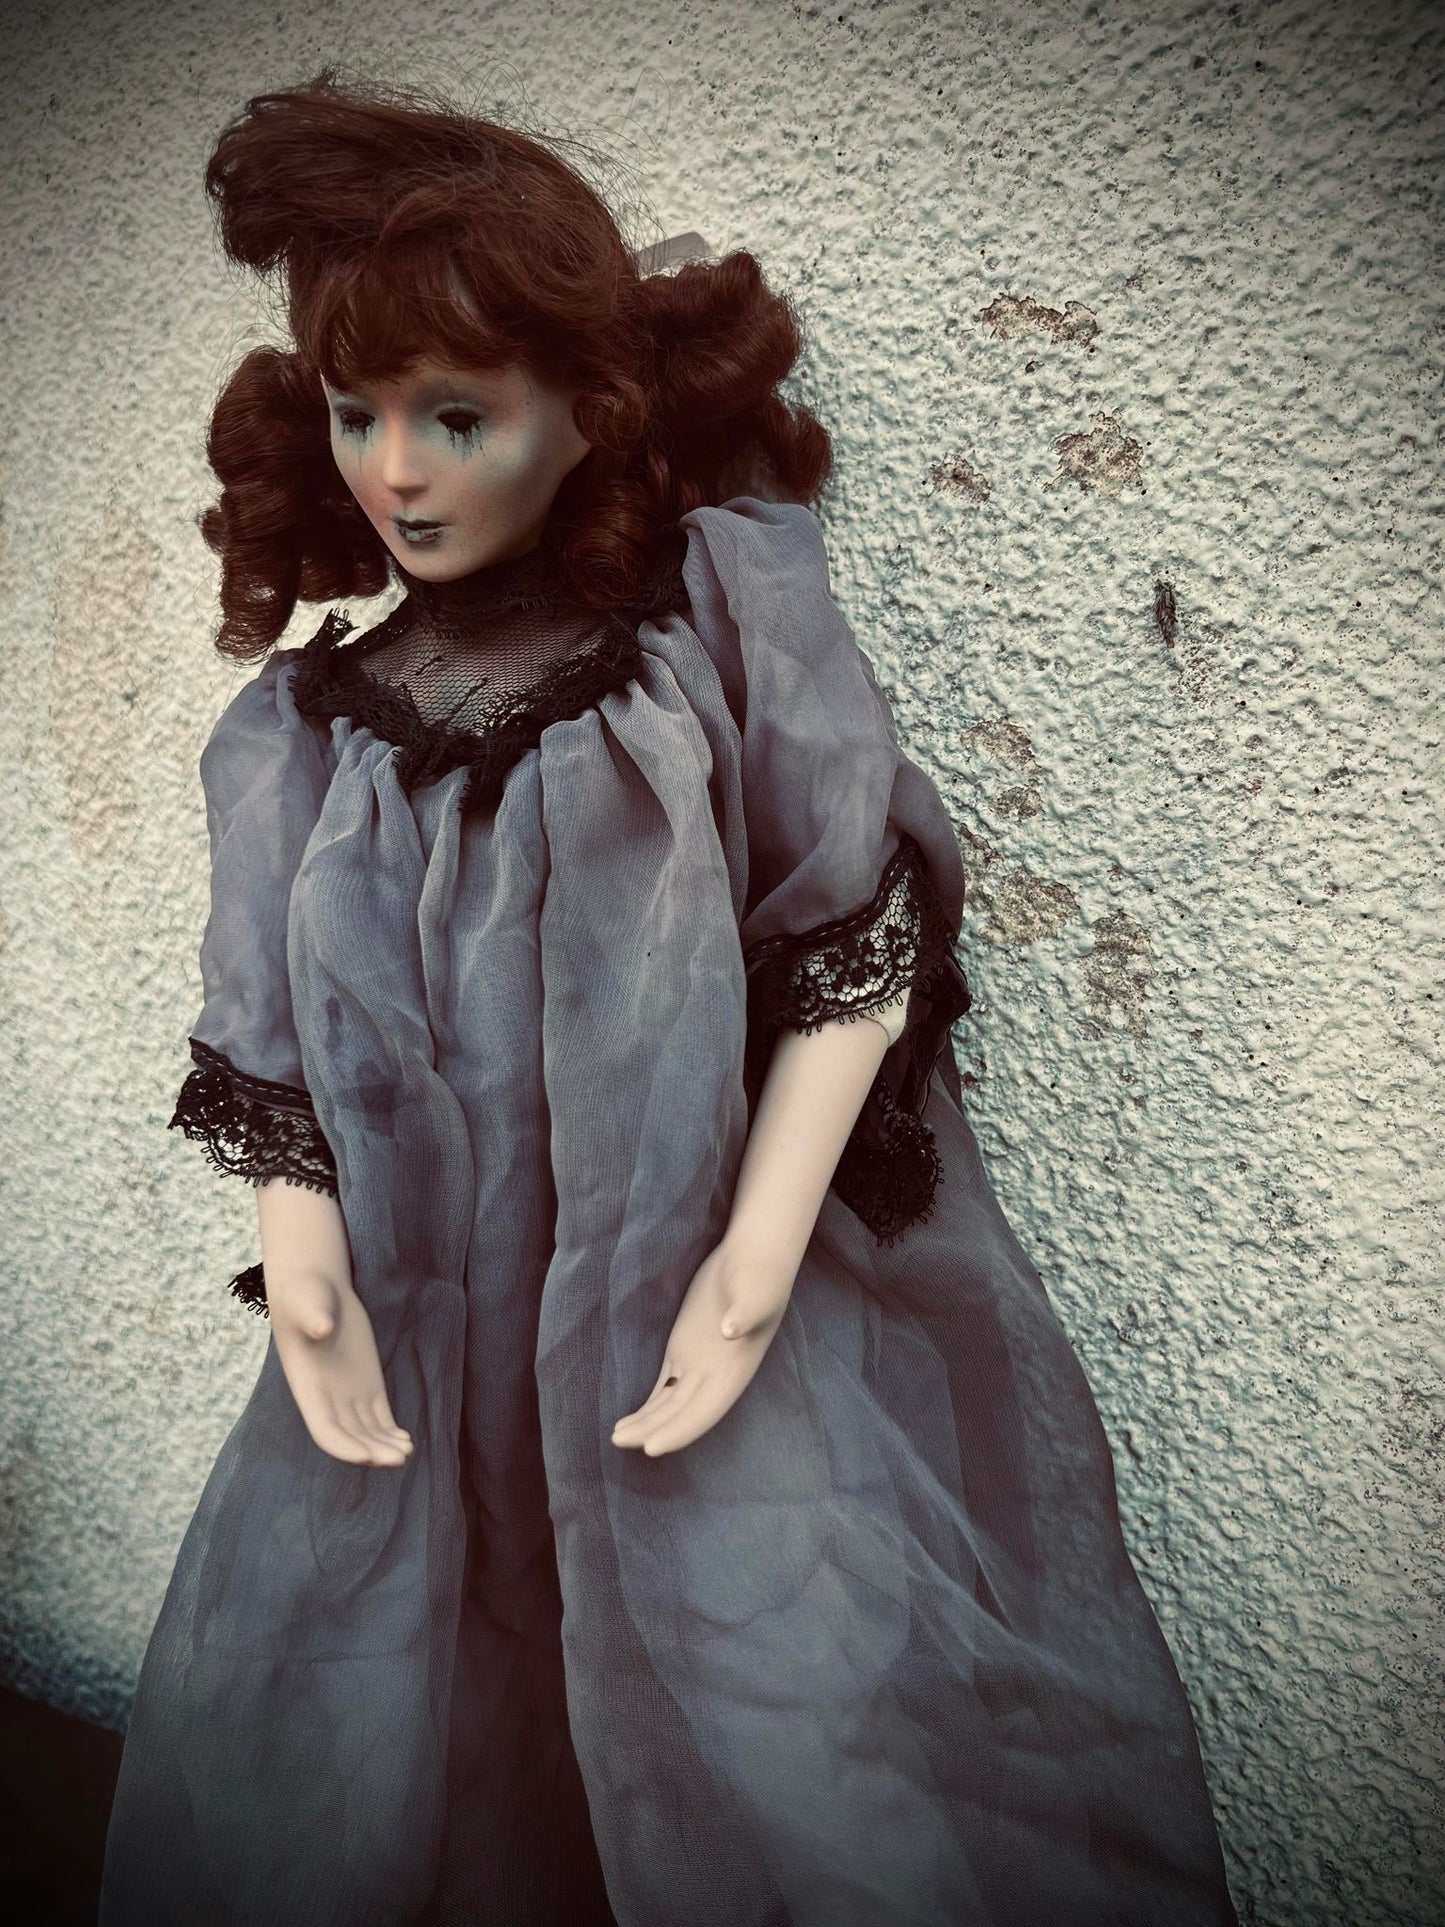 Meet Pamela 15" Doll Porcelain Zombie Undead Witchy Creepy Haunted Spirit Infected Scary Spooky Possessed Positive Oddity Gift Idea